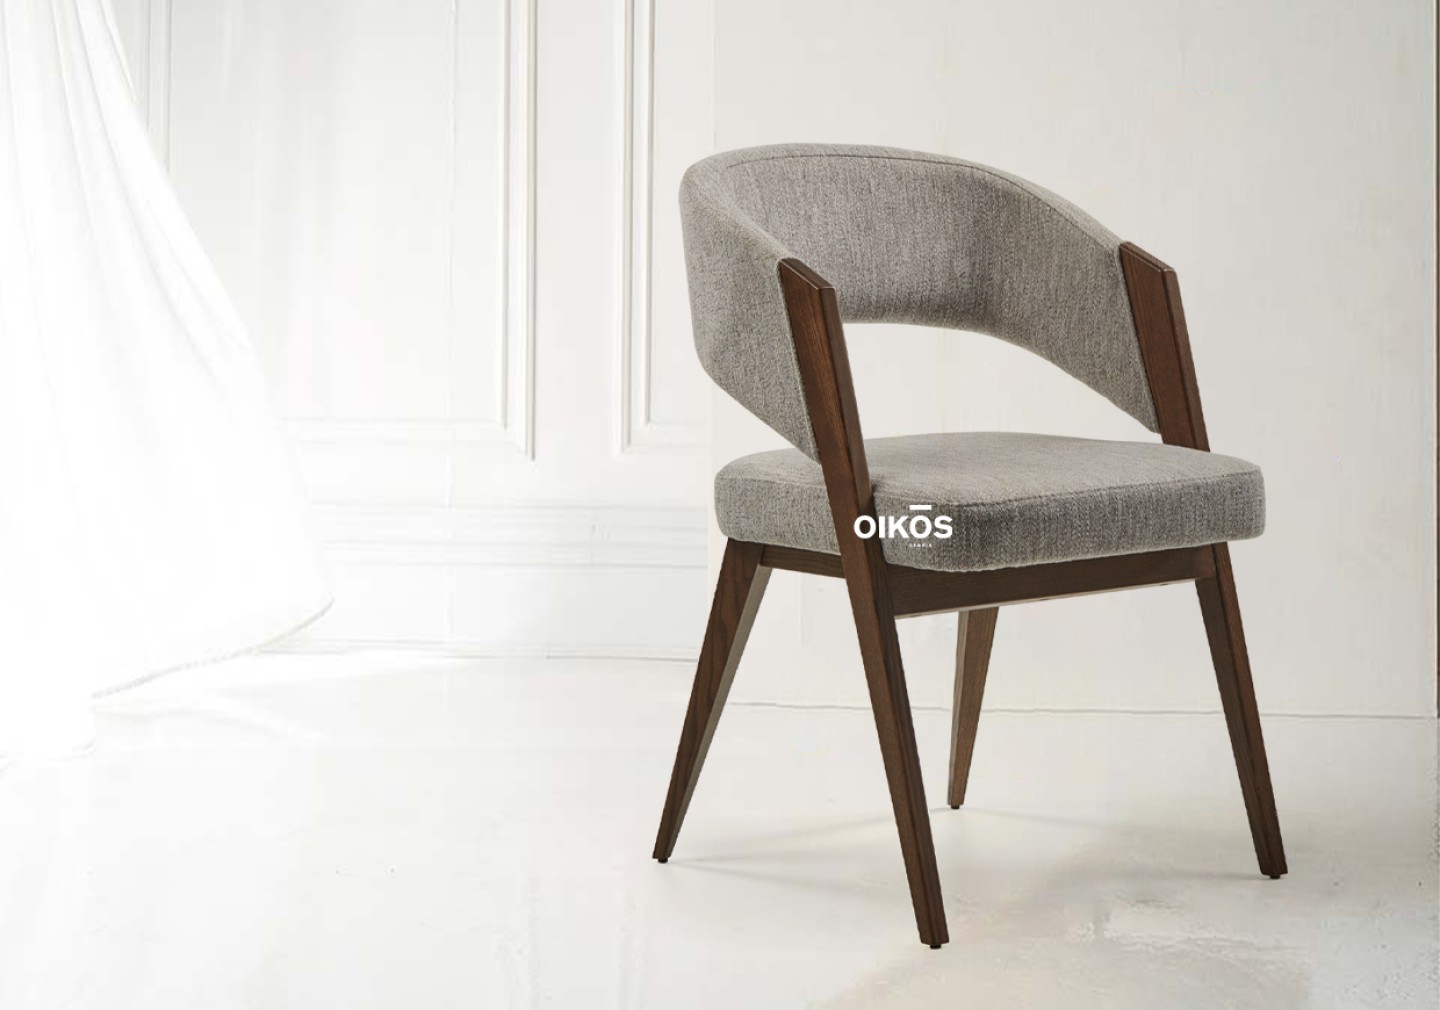 THE CONNOR DINING CHAIR